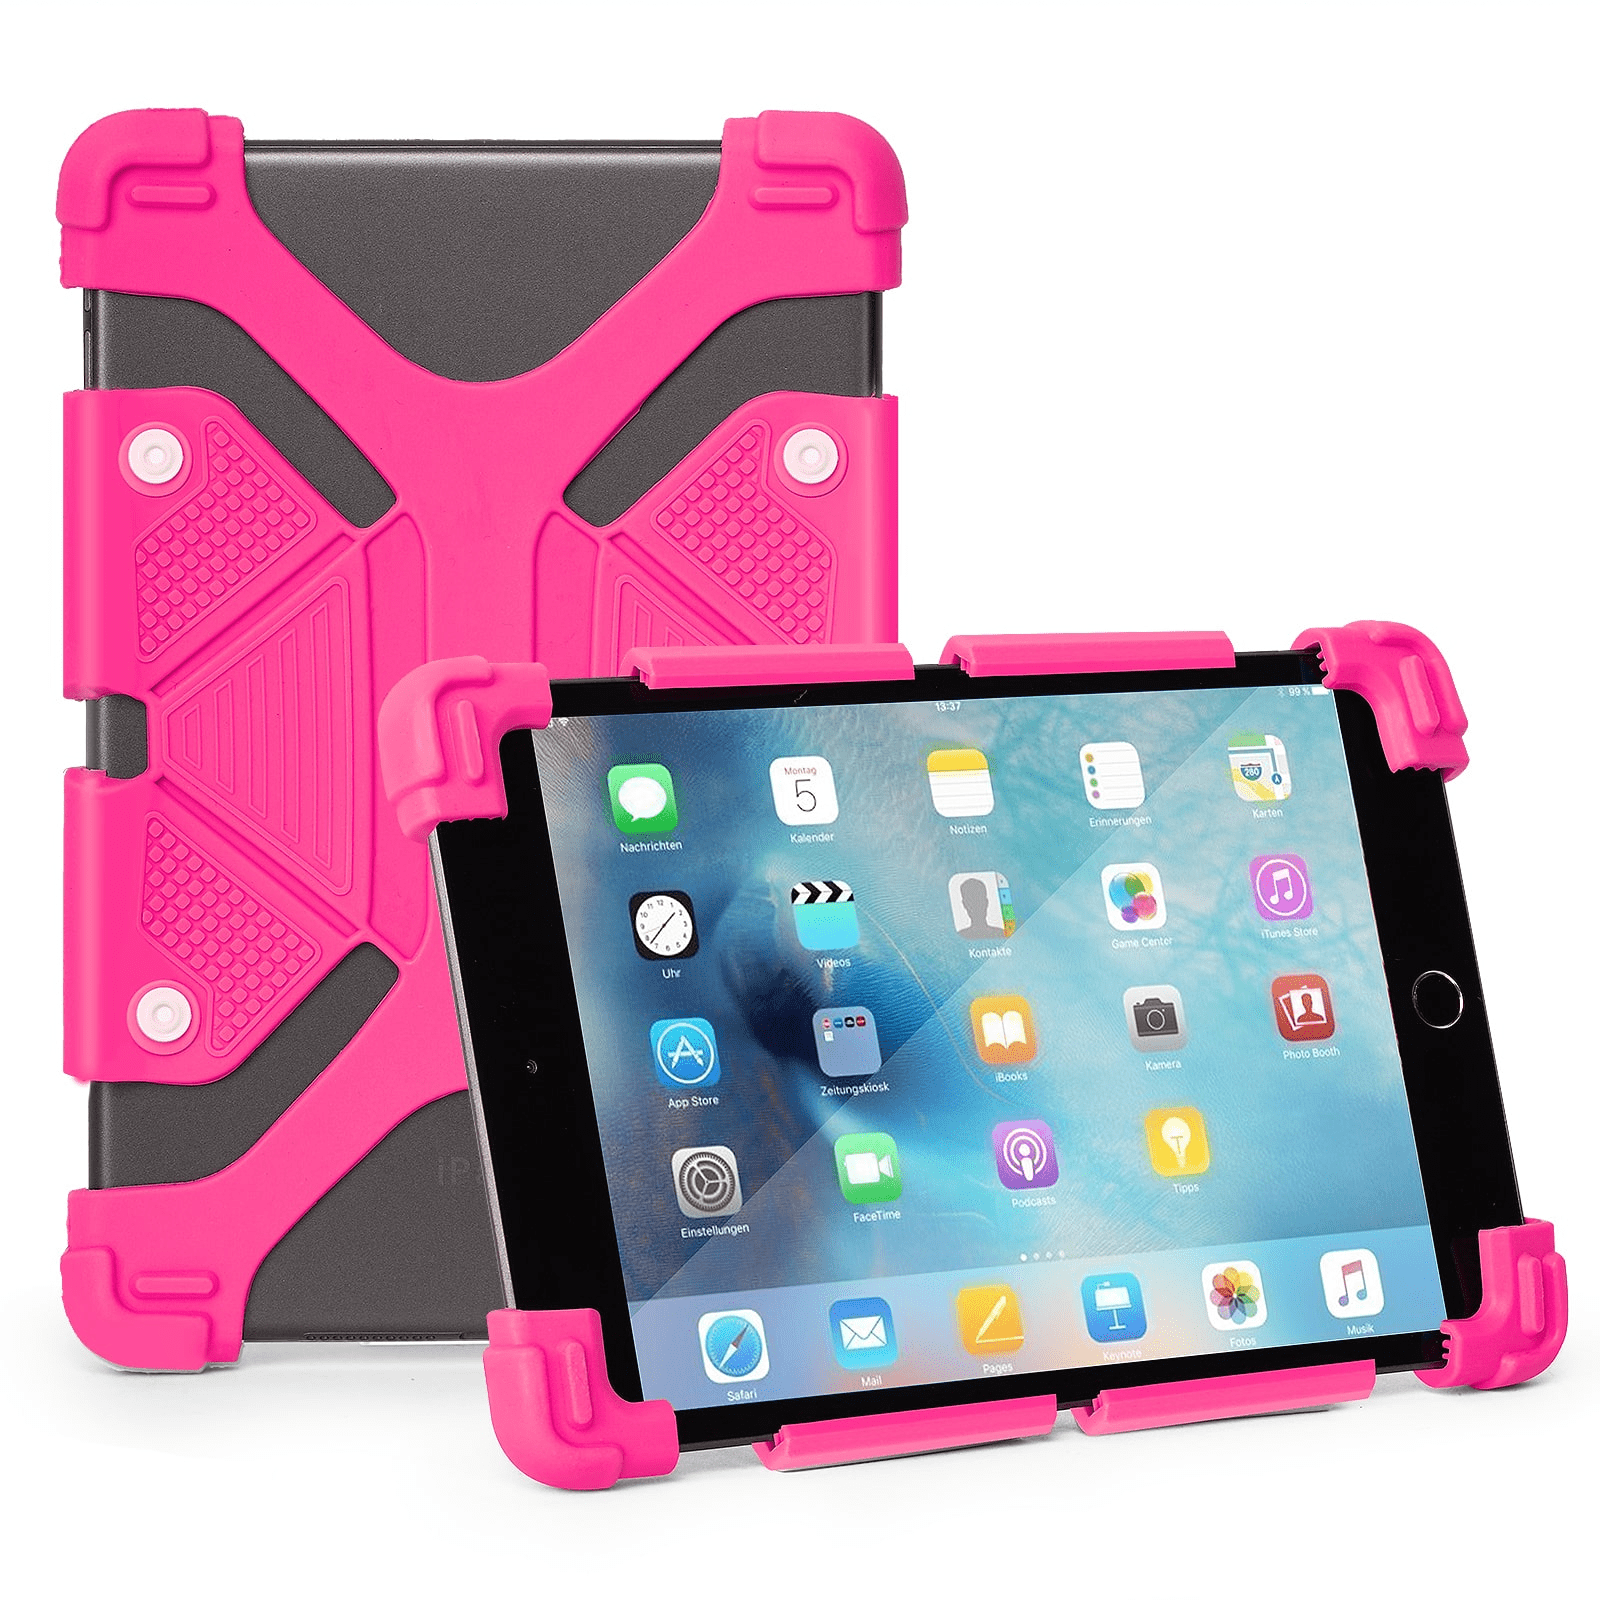 Onzuiver Poging interval Griffin Survivor All-Terrain - Protective case for tablet - silicone,  polycarbonate - lime, olive - for Apple iPad mini 2 (2nd generation); 3  (3rd generation) - Walmart.com